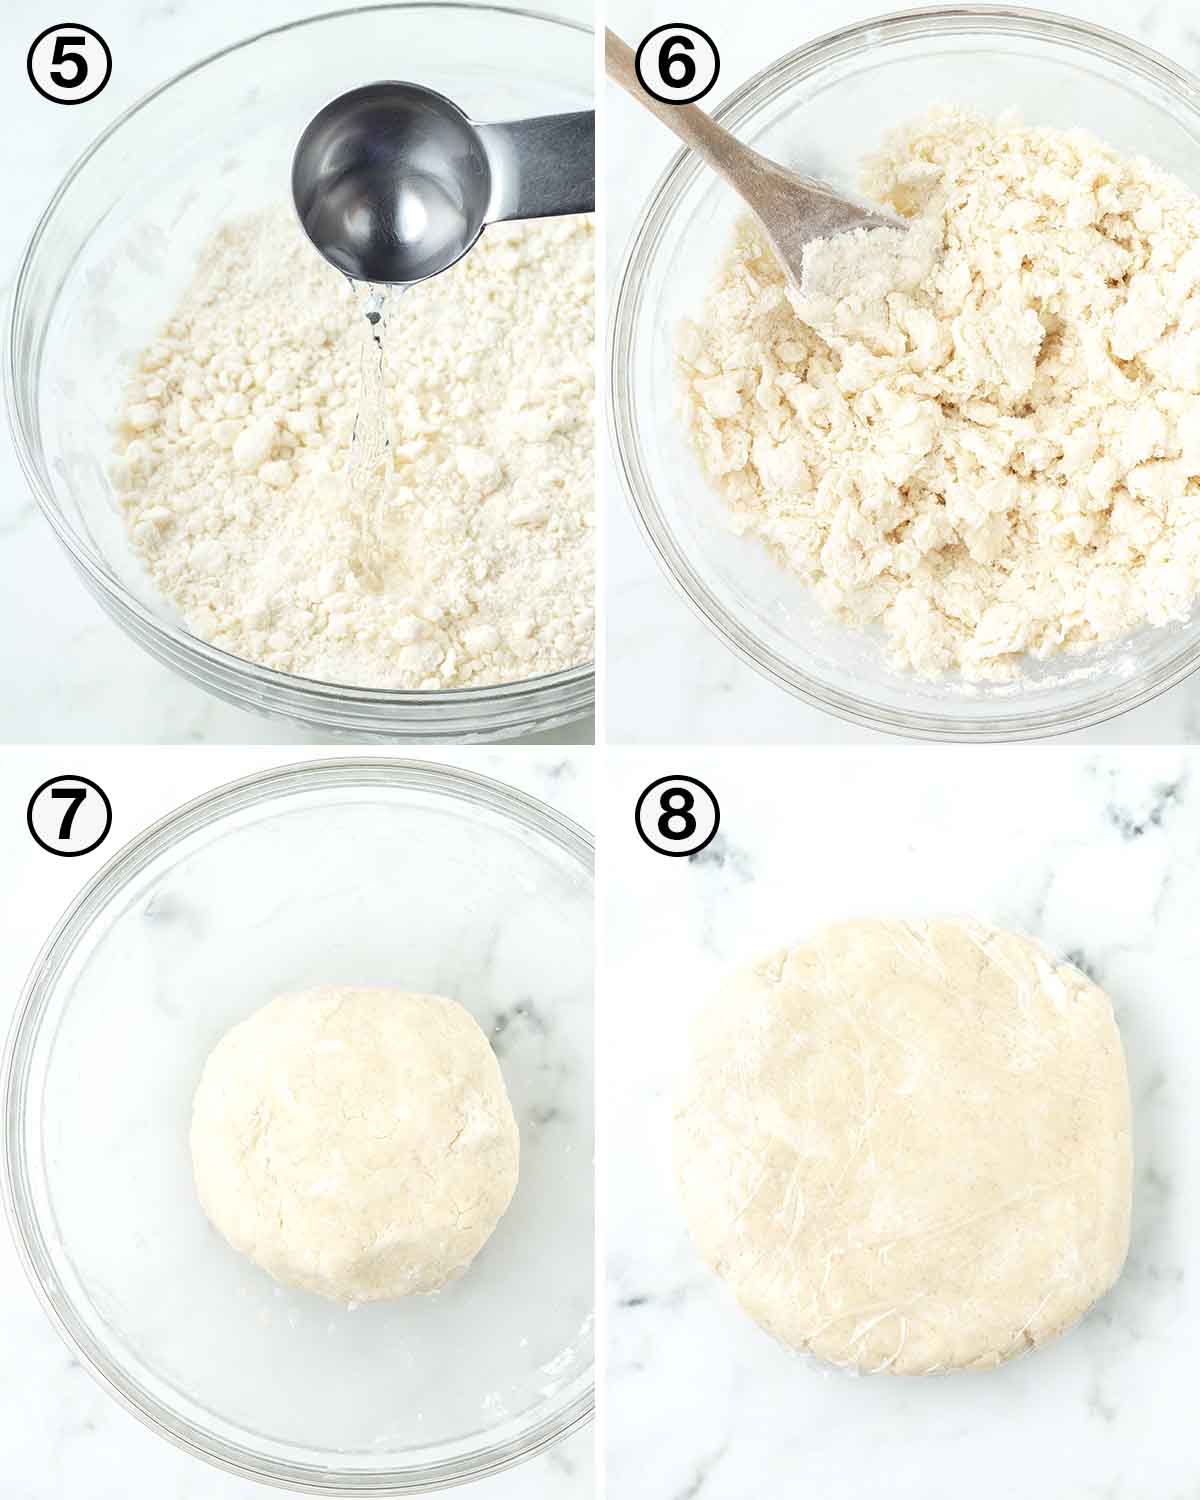 A collage of four images showing the second sequence of steps needed to make a flaky vegan pie crust.